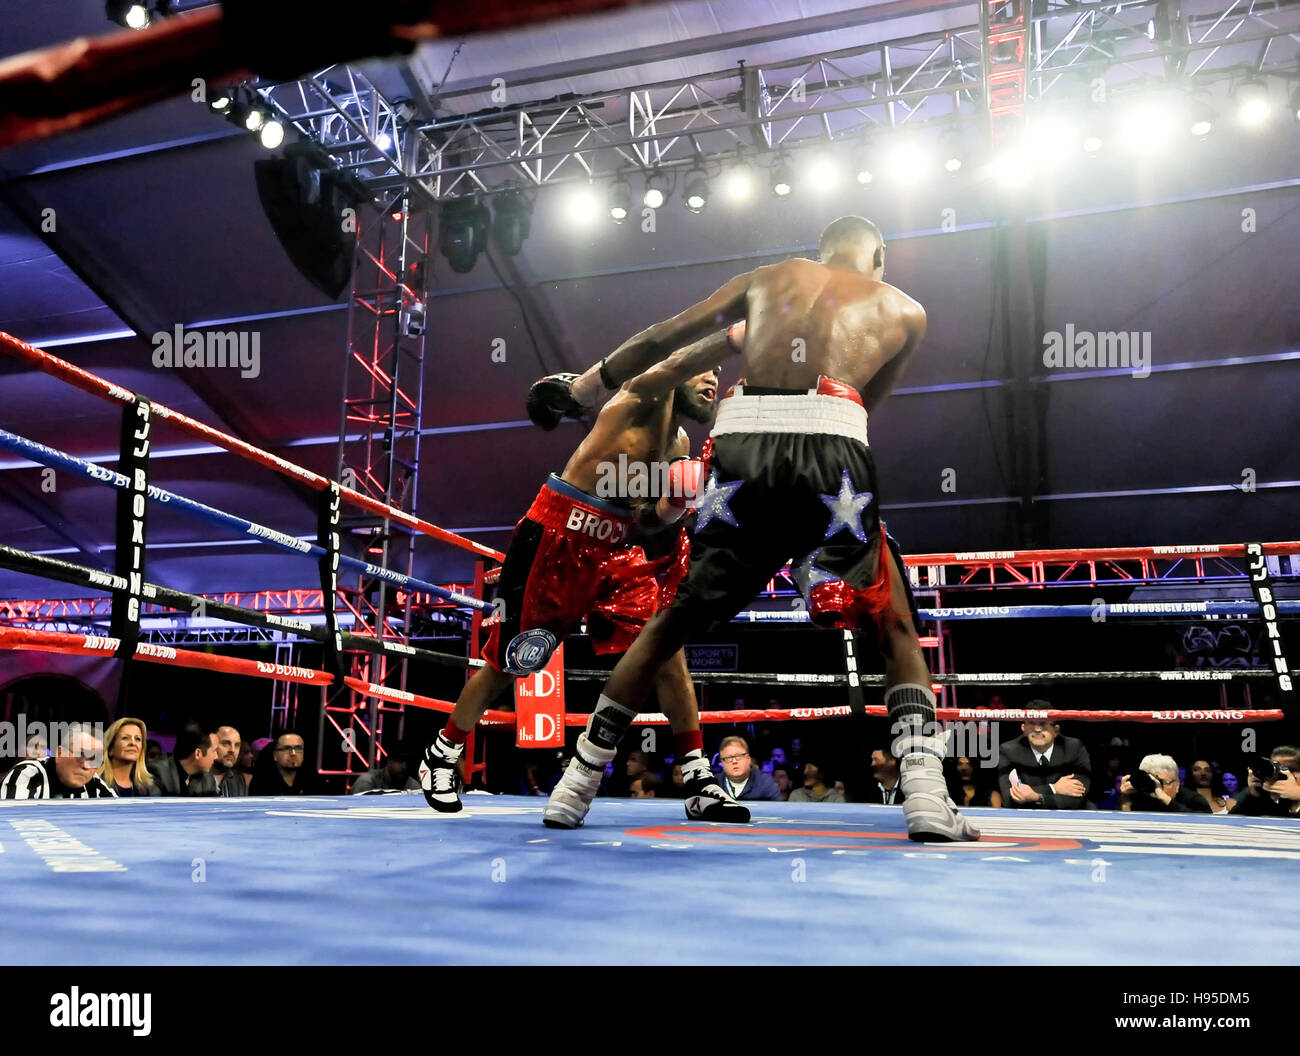 Las Vegas, Nevada November 18, 2016 - Reynaldo Blanco battles Demond Brock at “Knockout Night at the D”  presented by the D Las Vegas and DLVEC and promoted by Roy Jones Jr. Stock Photo